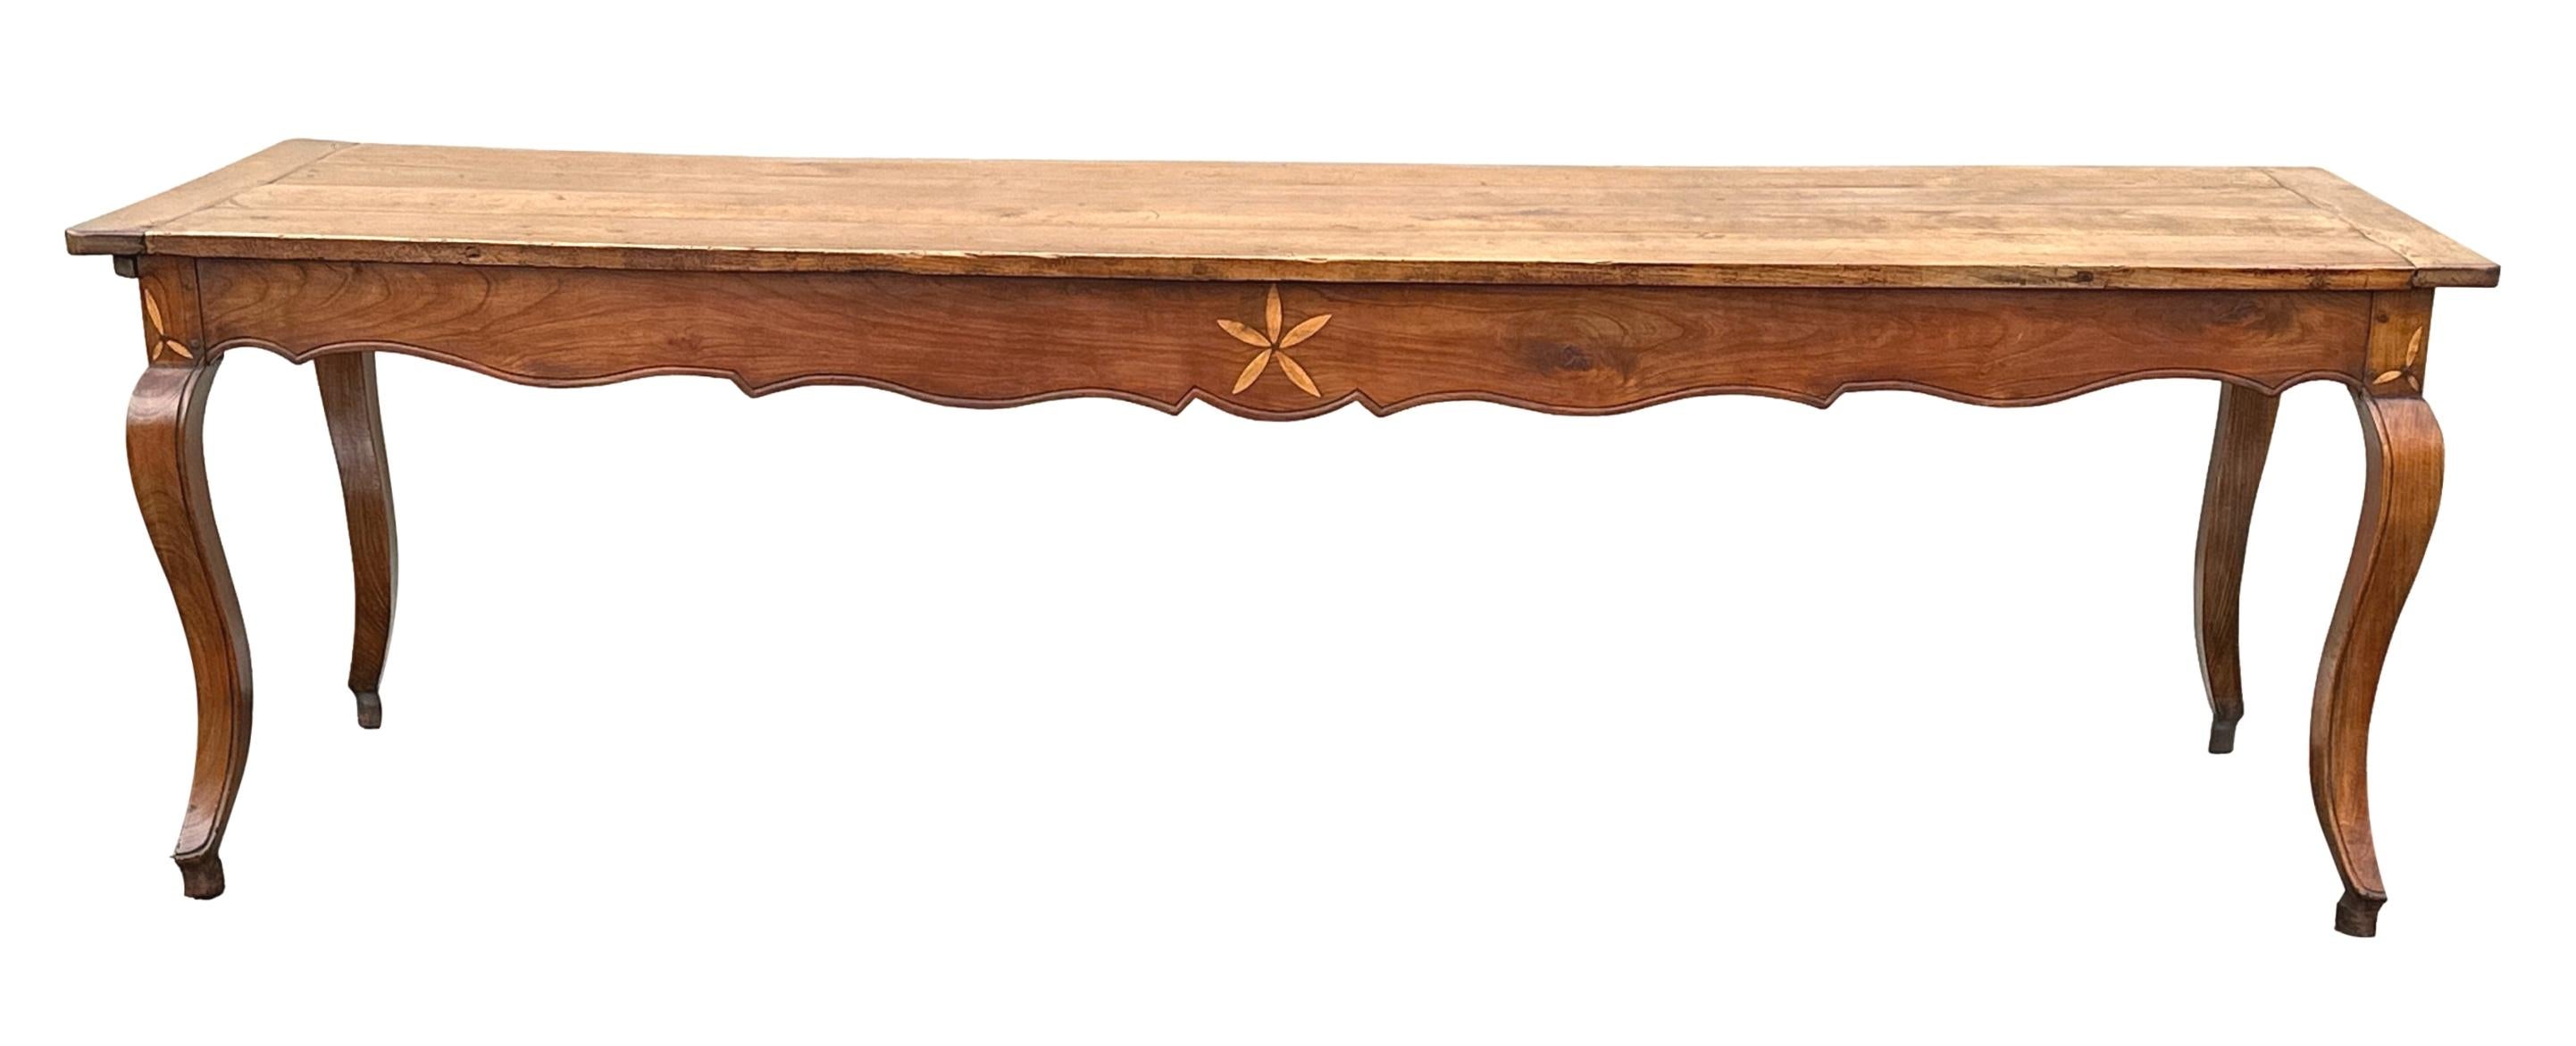 Large Early 19th Century French Cherry Wood Farmhouse Kitchen Table For Sale 8